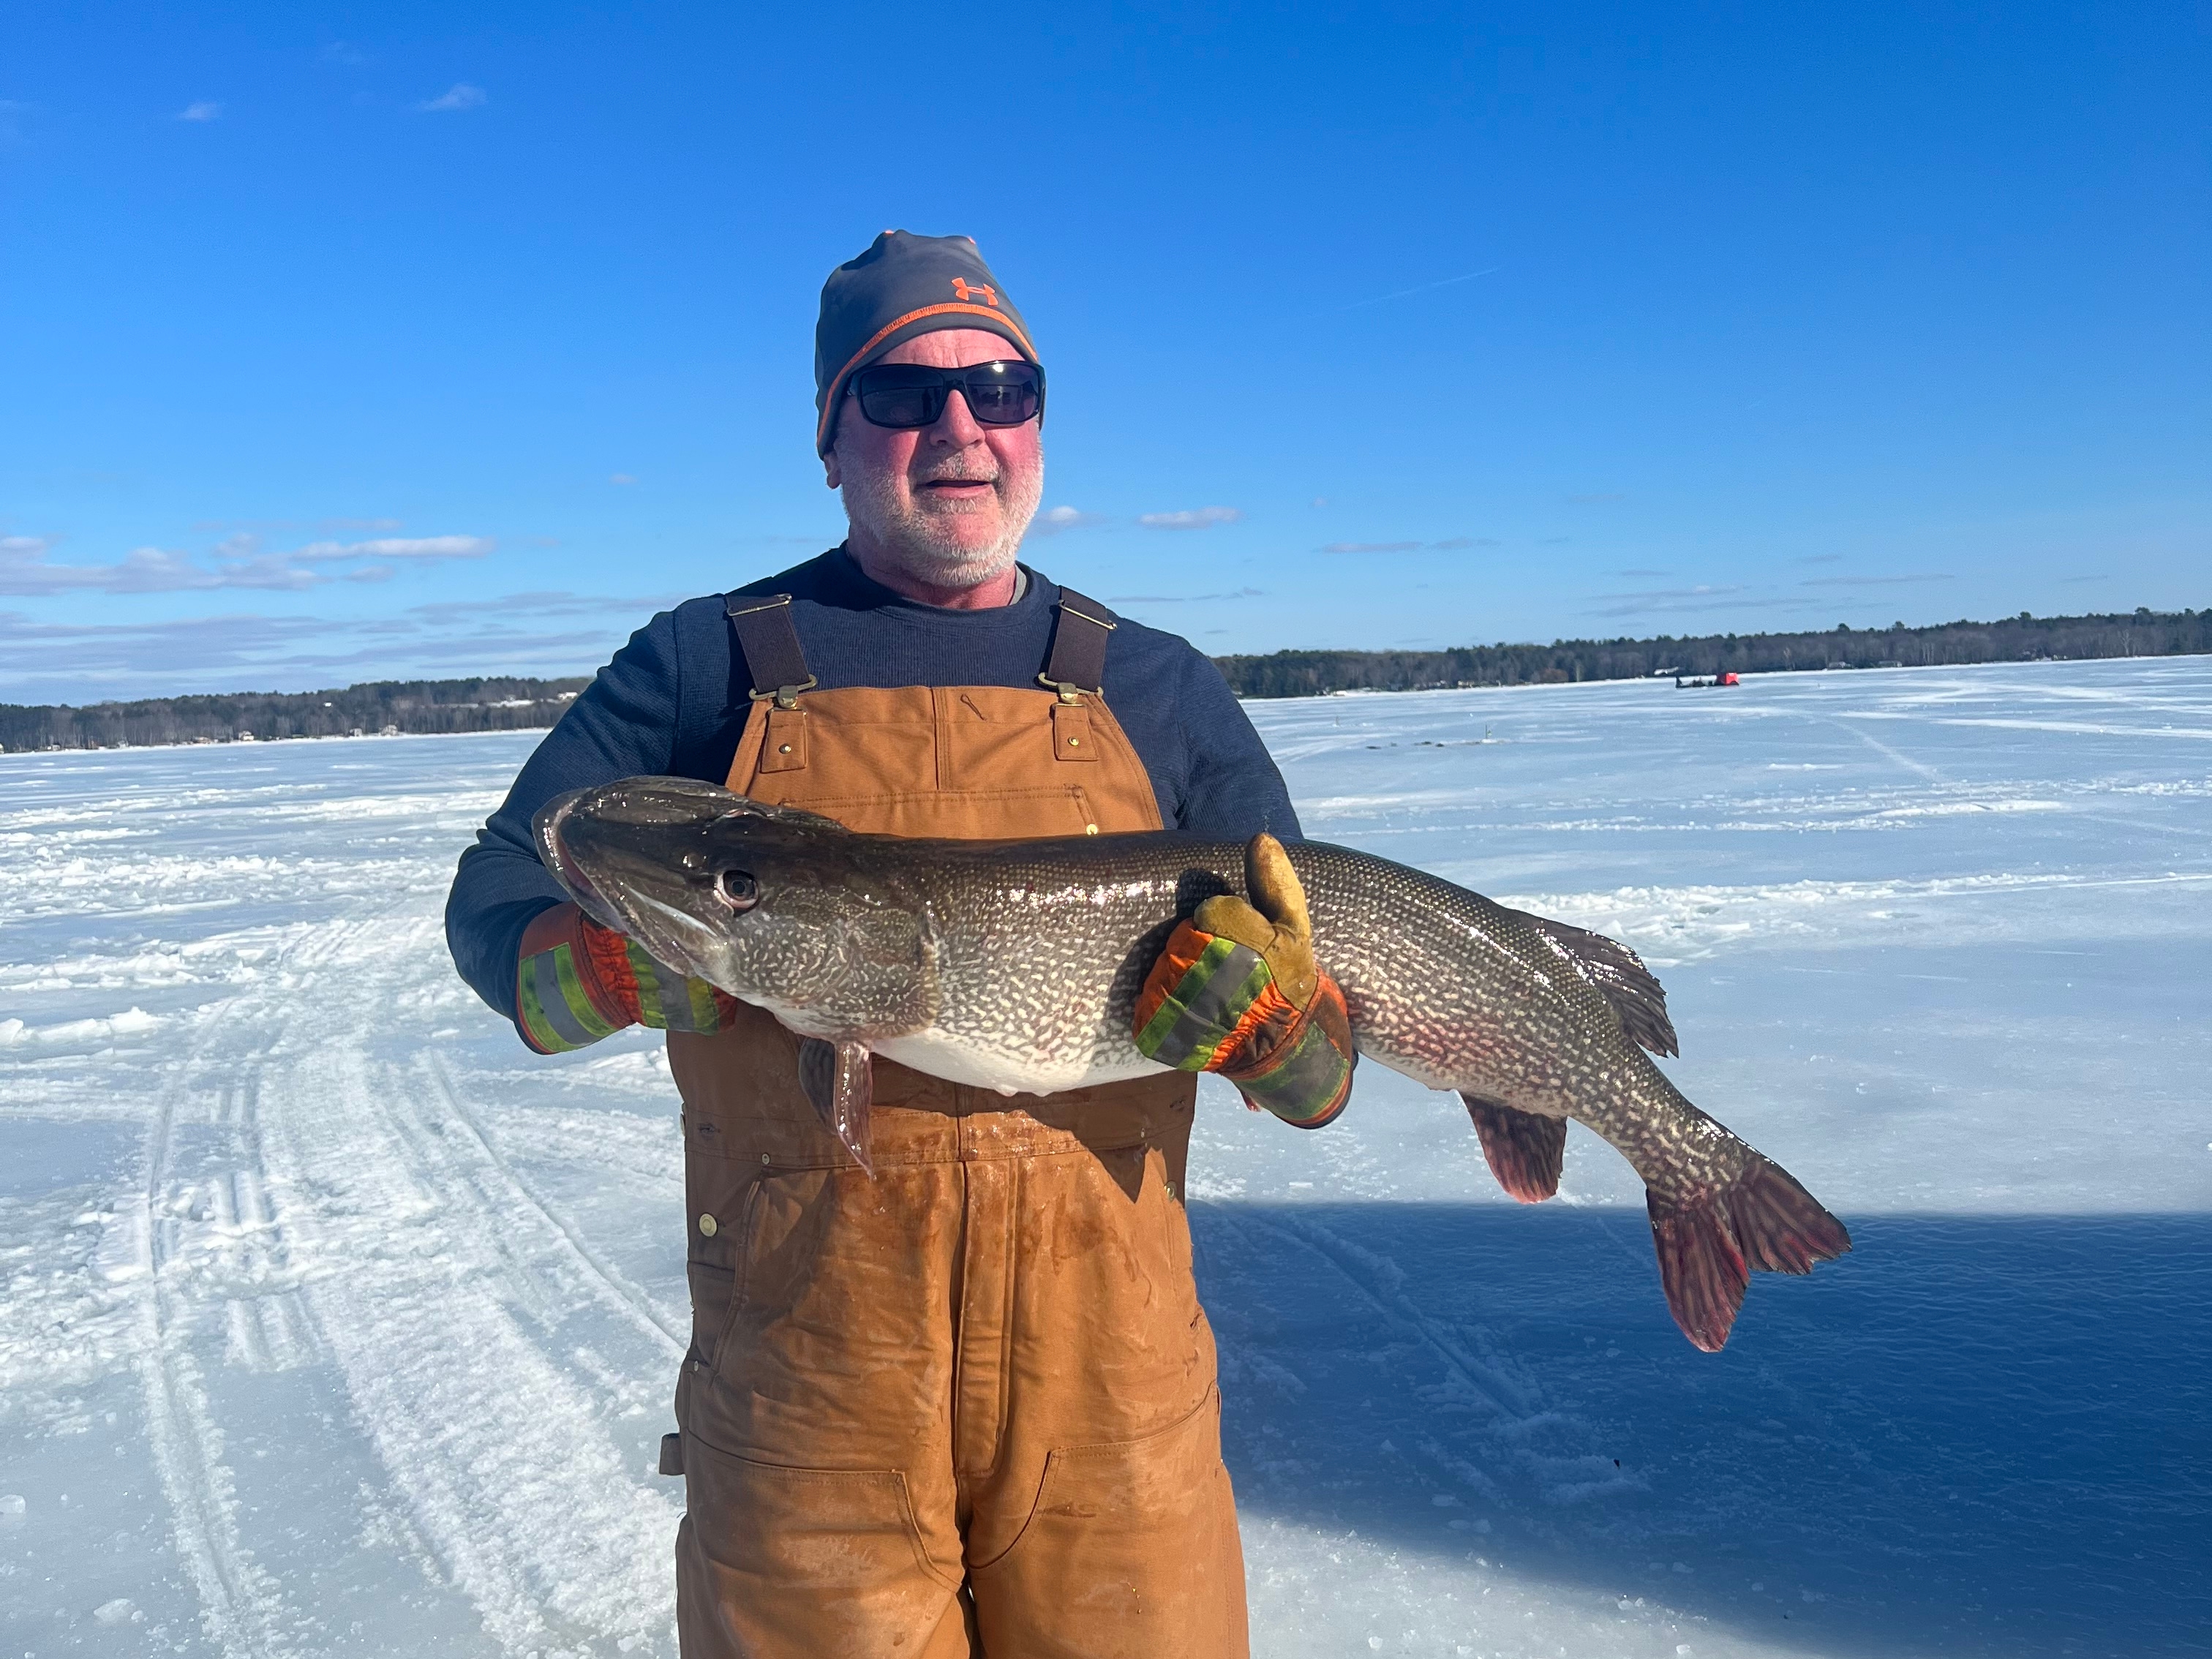 Maine man reels in massive, 'world-class' 25.9 pound northern pike